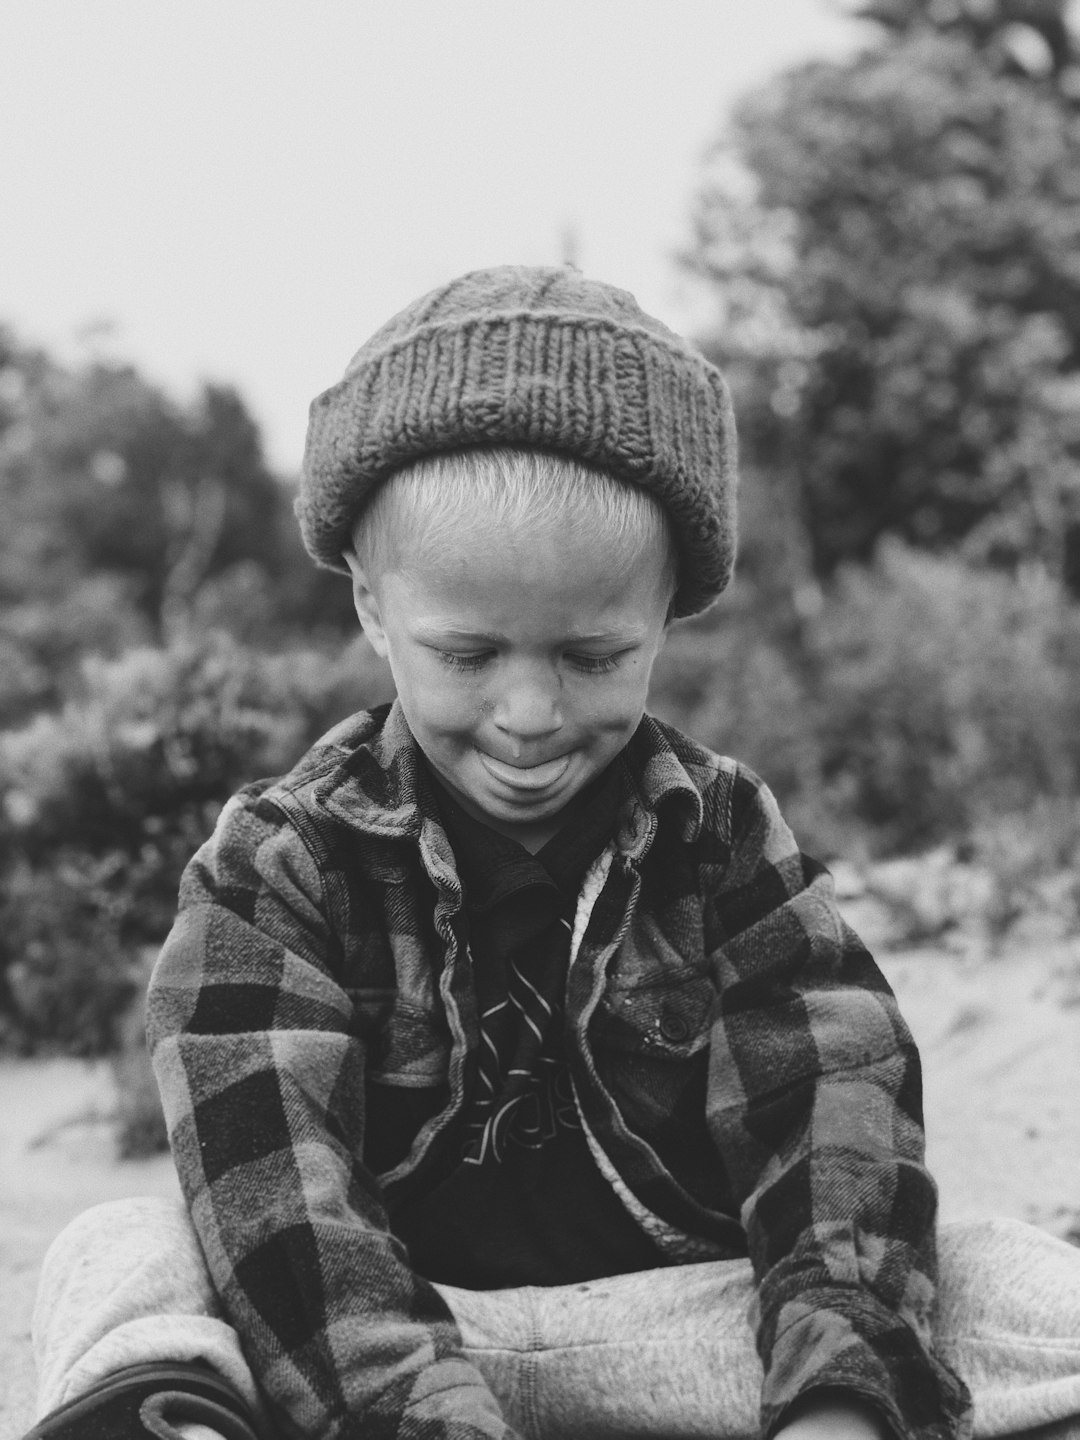 grayscale photo of boy in jacket and knit cap